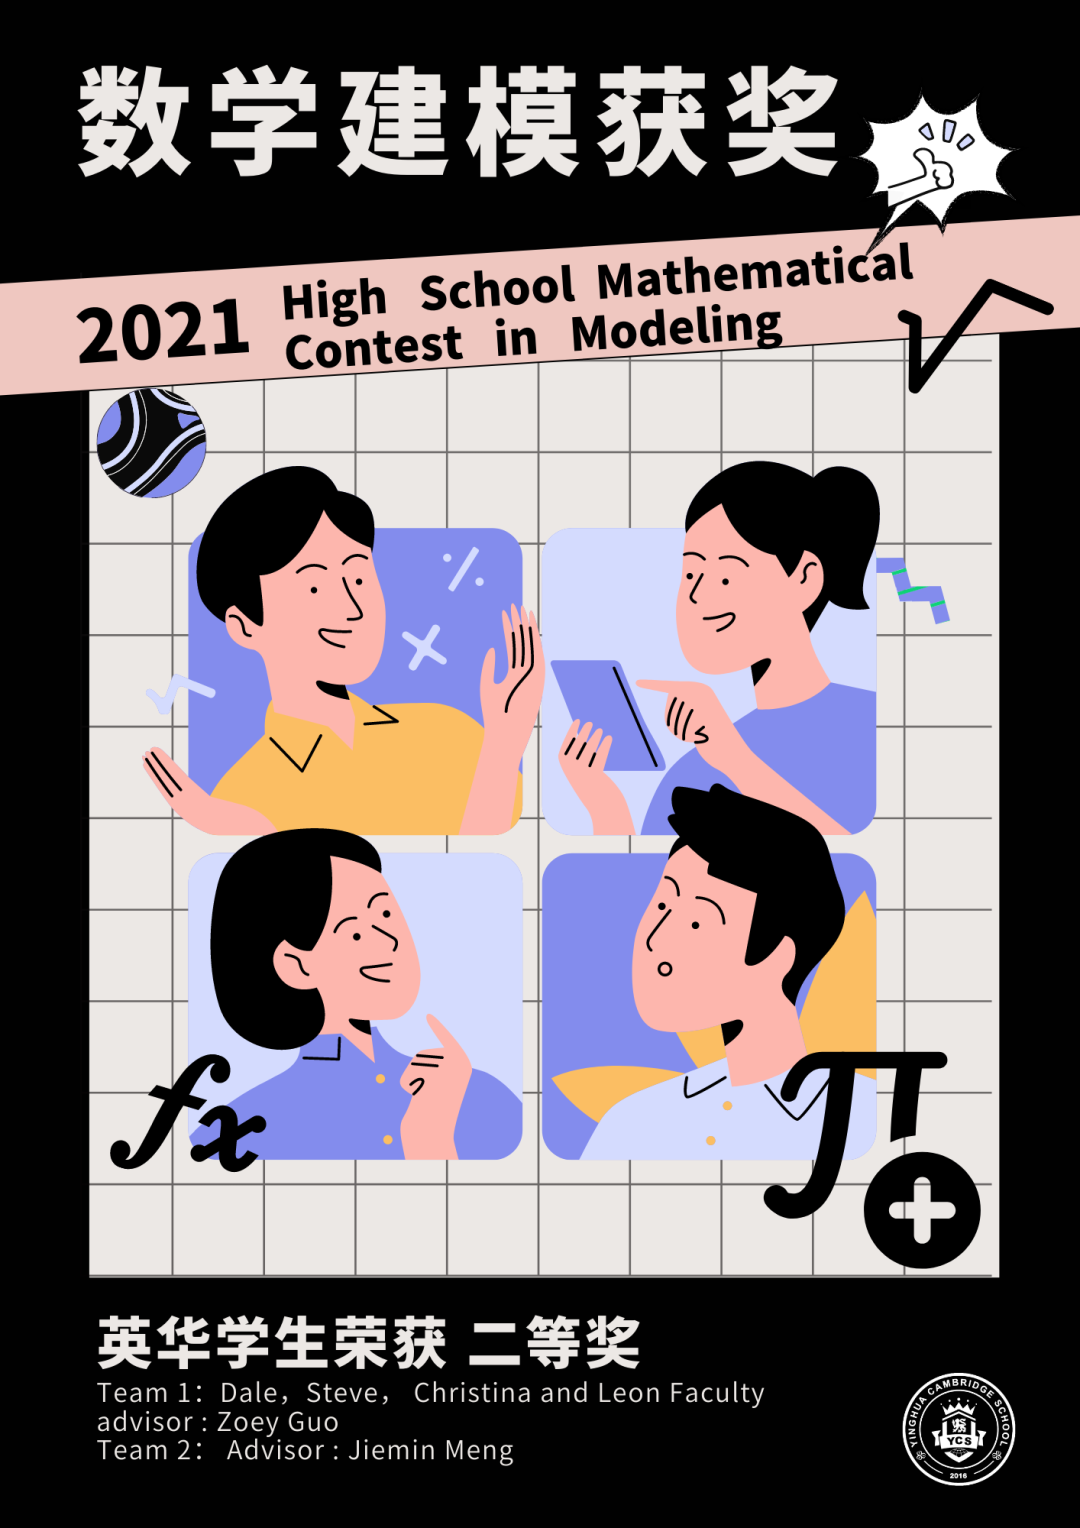 2021 High School Mathematical Contest in Modeling